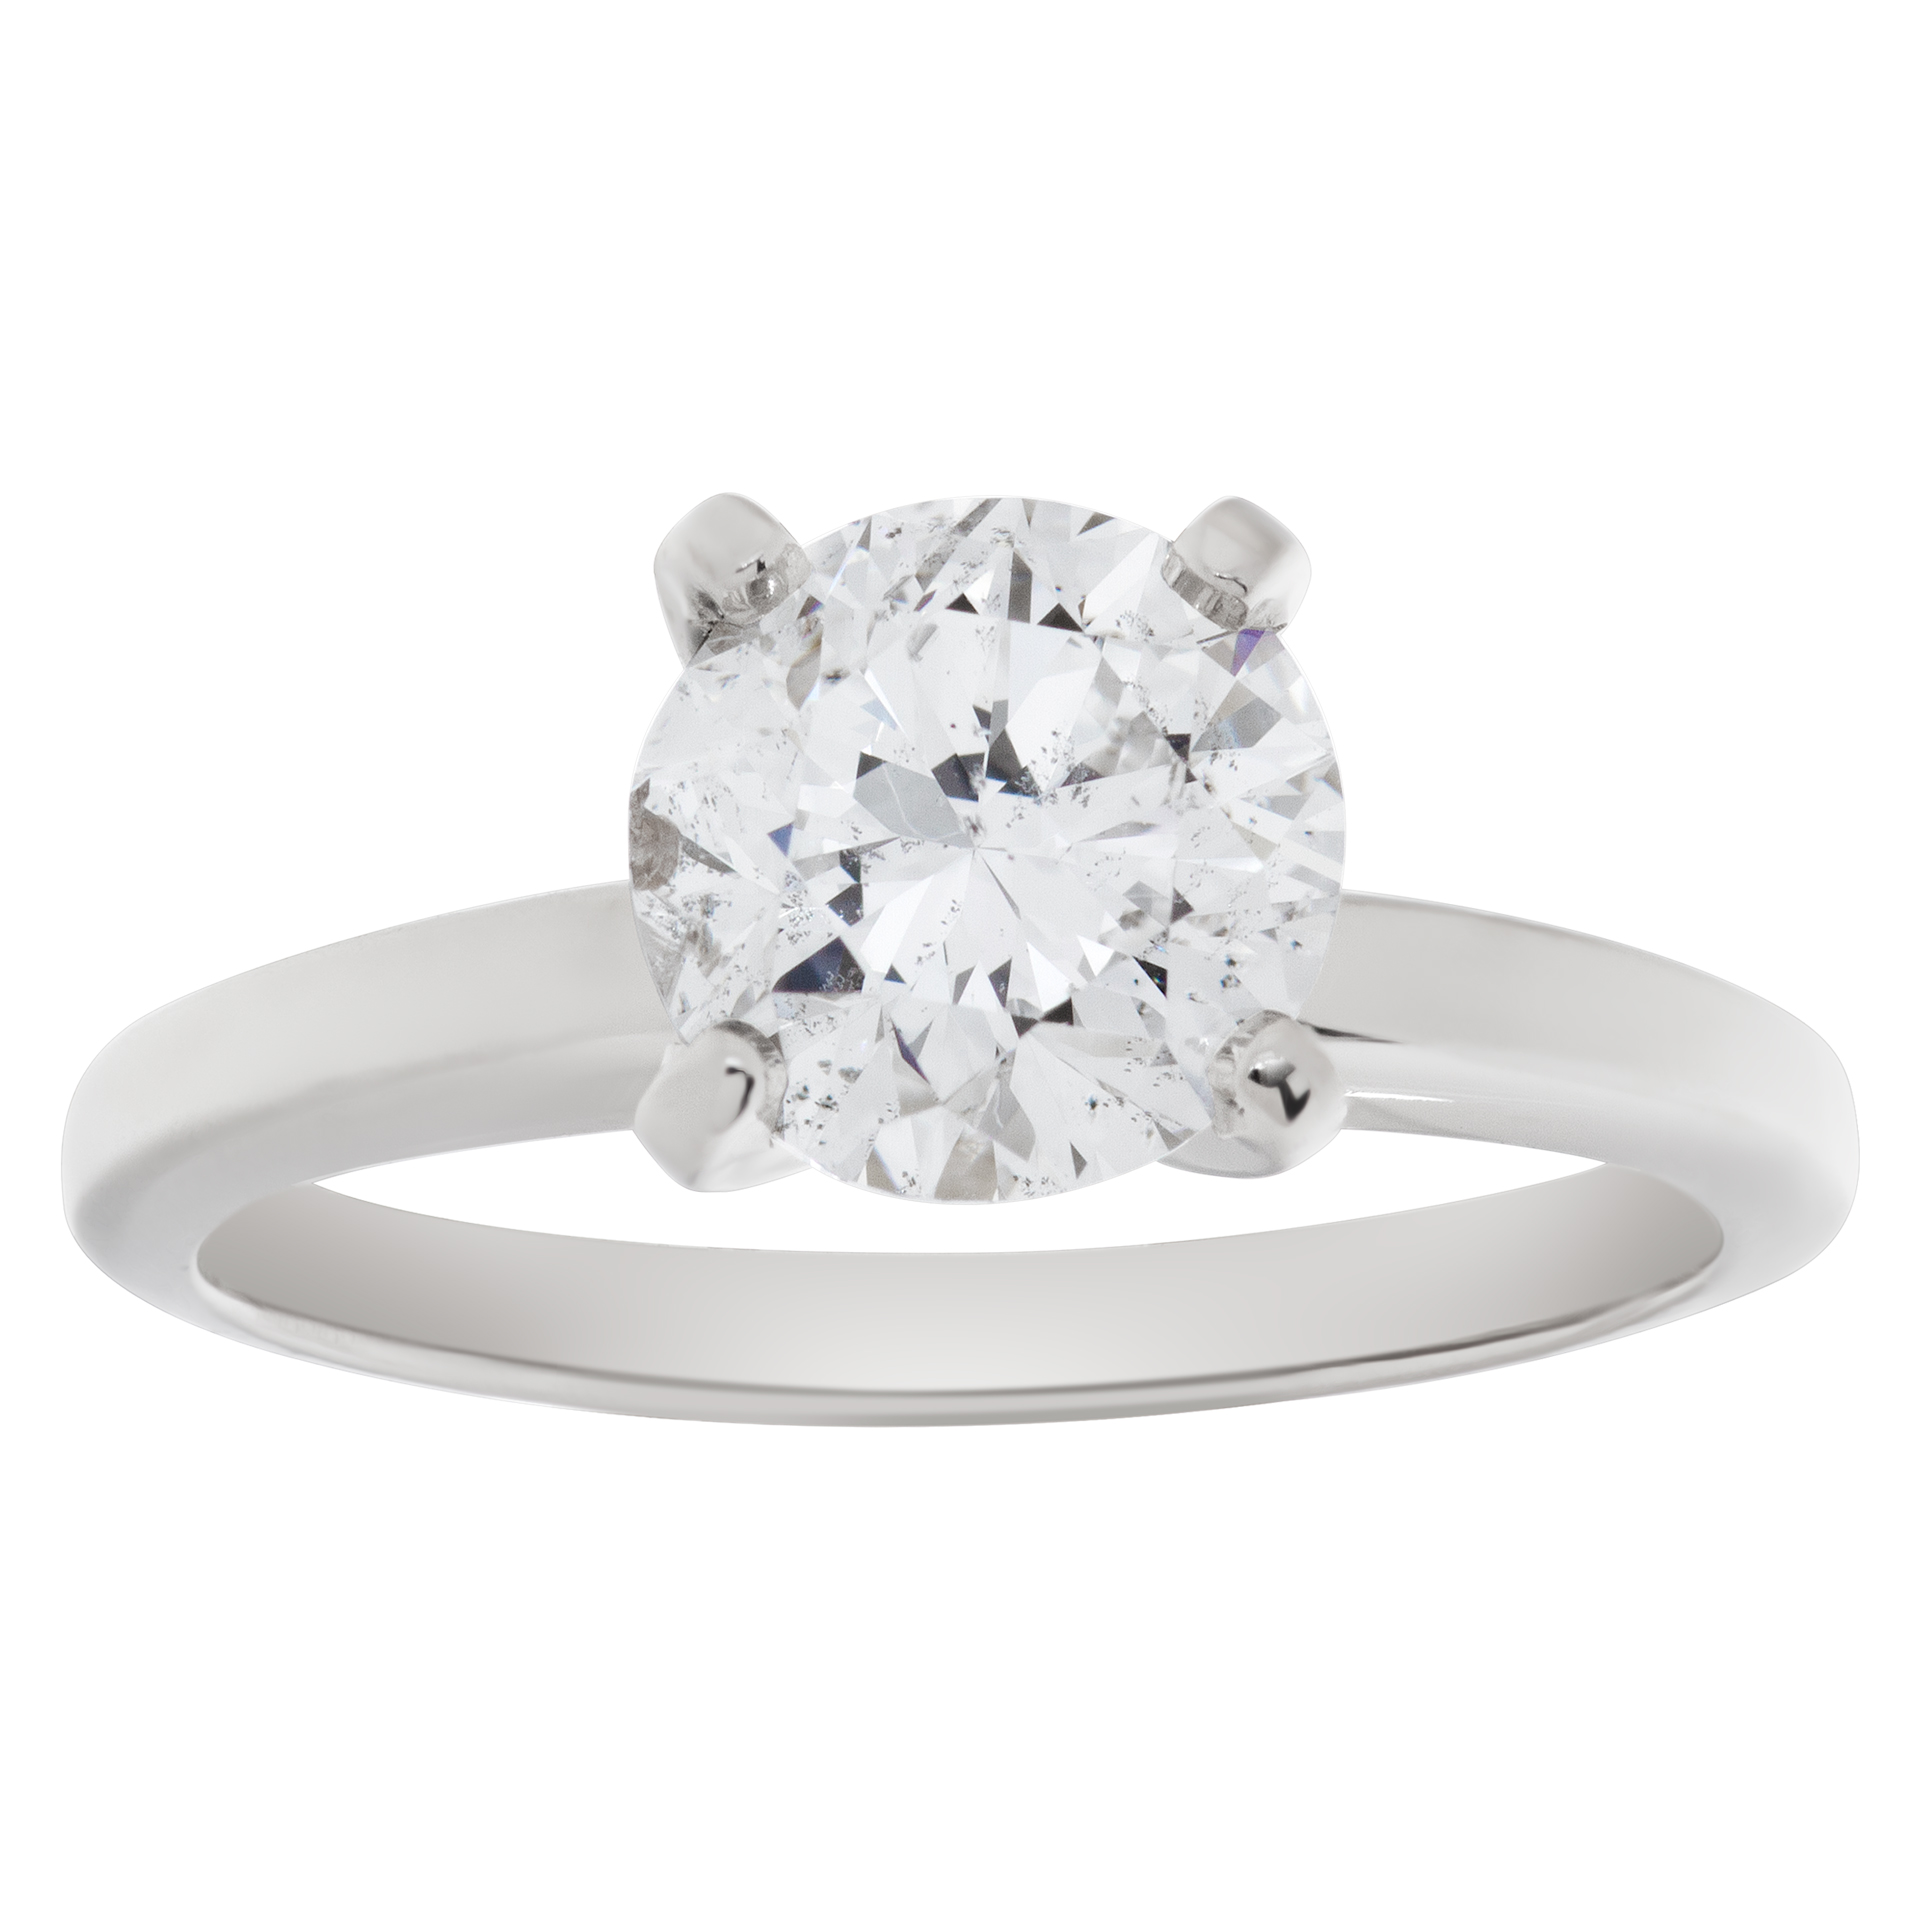 GIA certified round brilliant diamond 1.51 carat (G color, I1 clarity) ring image 1